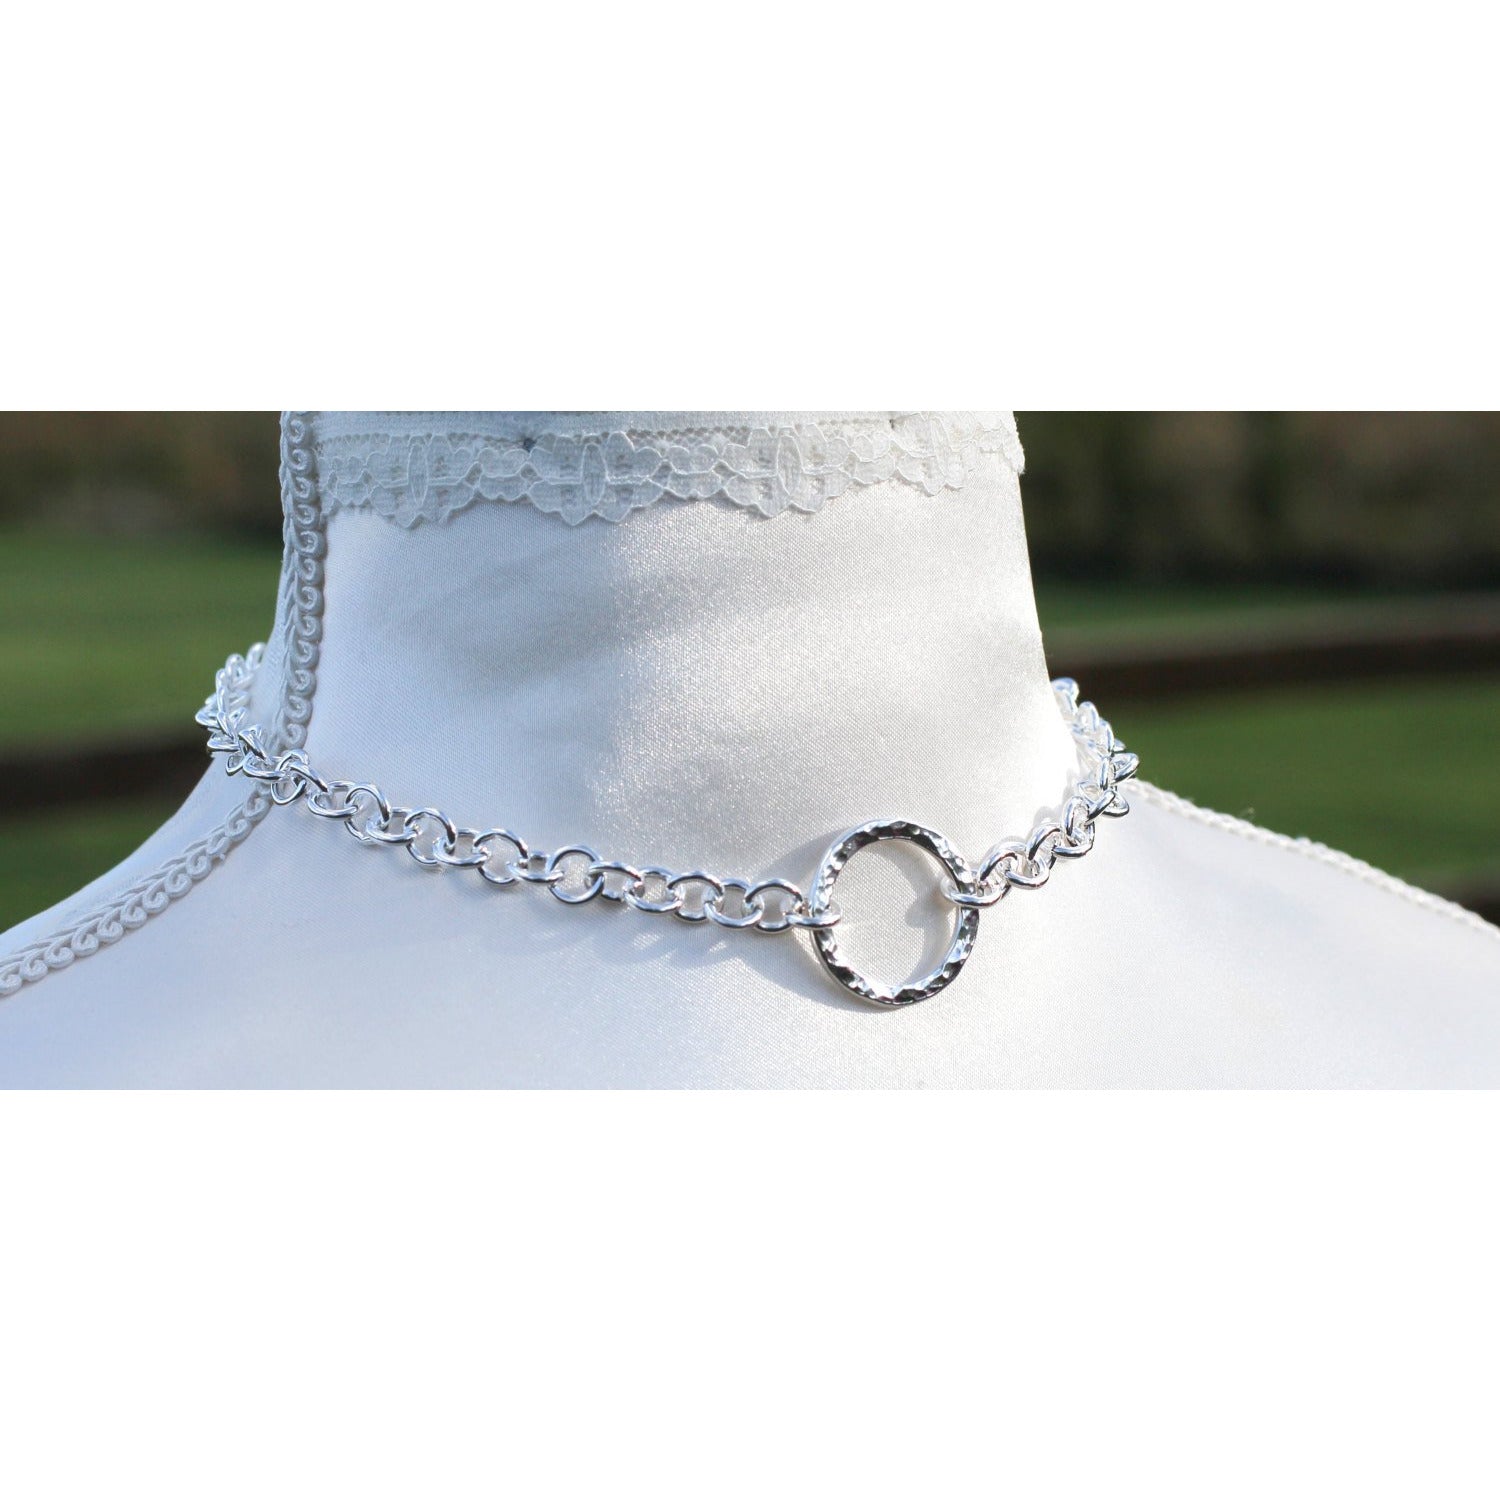 Handmade Sterling Silver BDSM Day Collar - Heavy Chain, Textured O Ring, Adjustable Fit